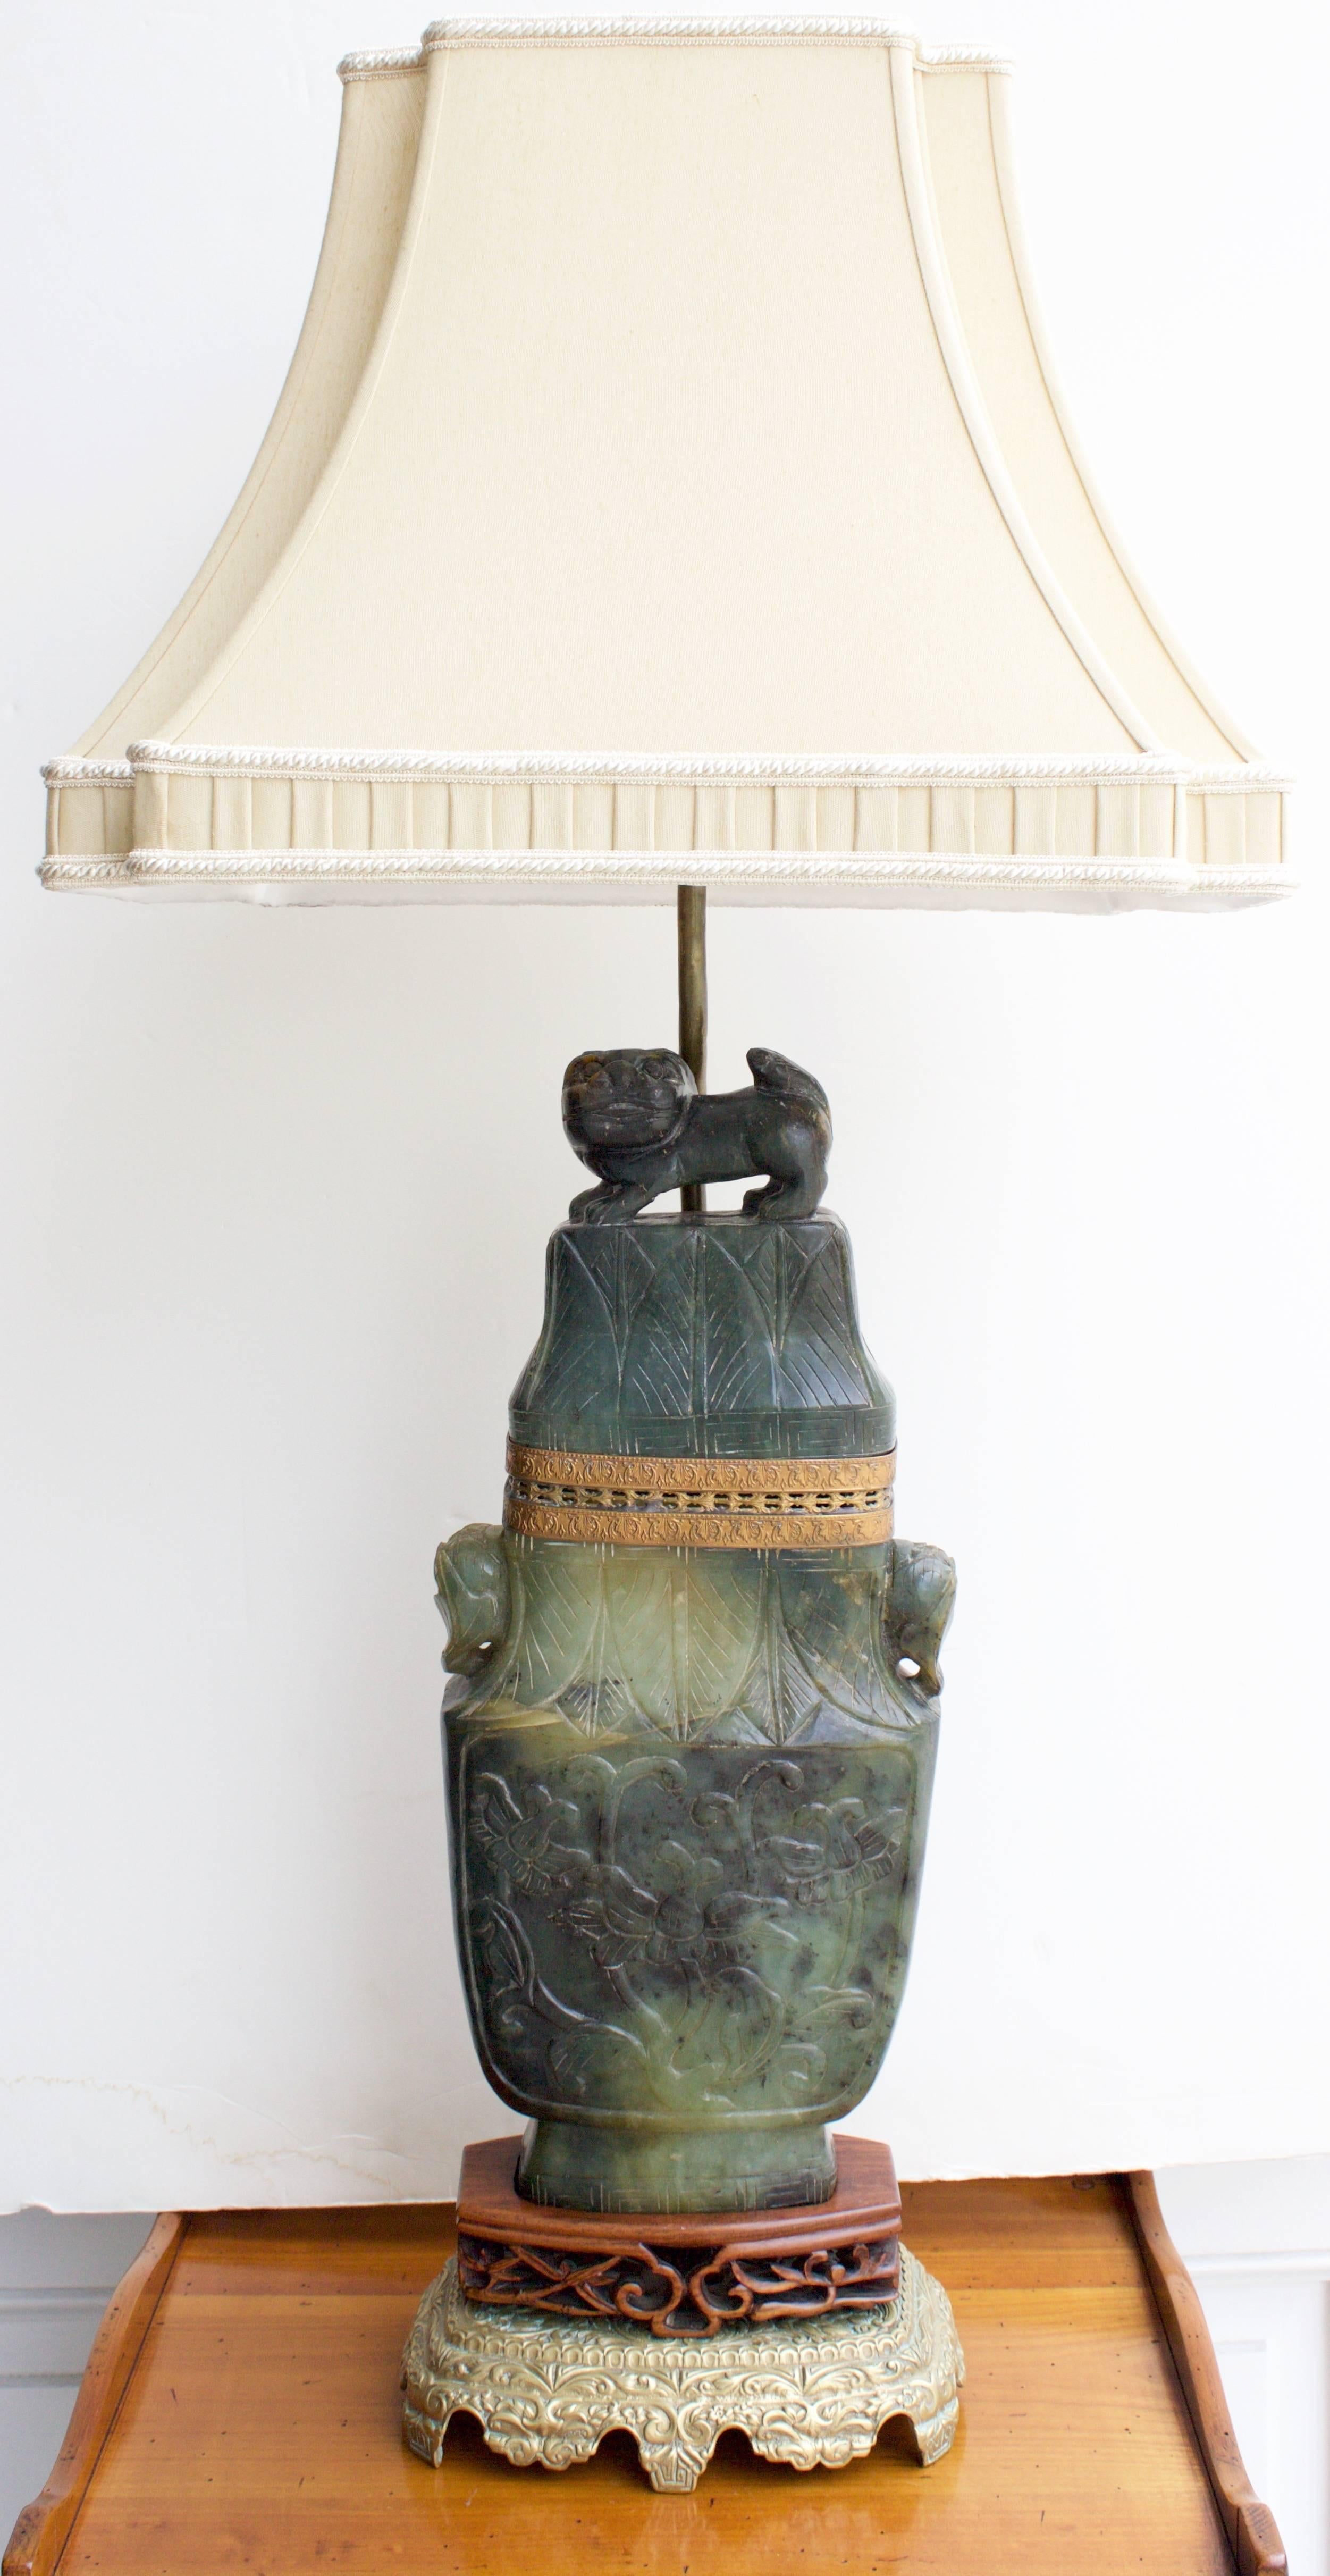 Rare Antique carved jade lidded urn table lamp .Mounted on a highly carved wood support resting on a bronze base.The jade carving is on both sides and represent flowers and leaves.The lid is surmounted by a Foo Dog.
newly rewired with a regular